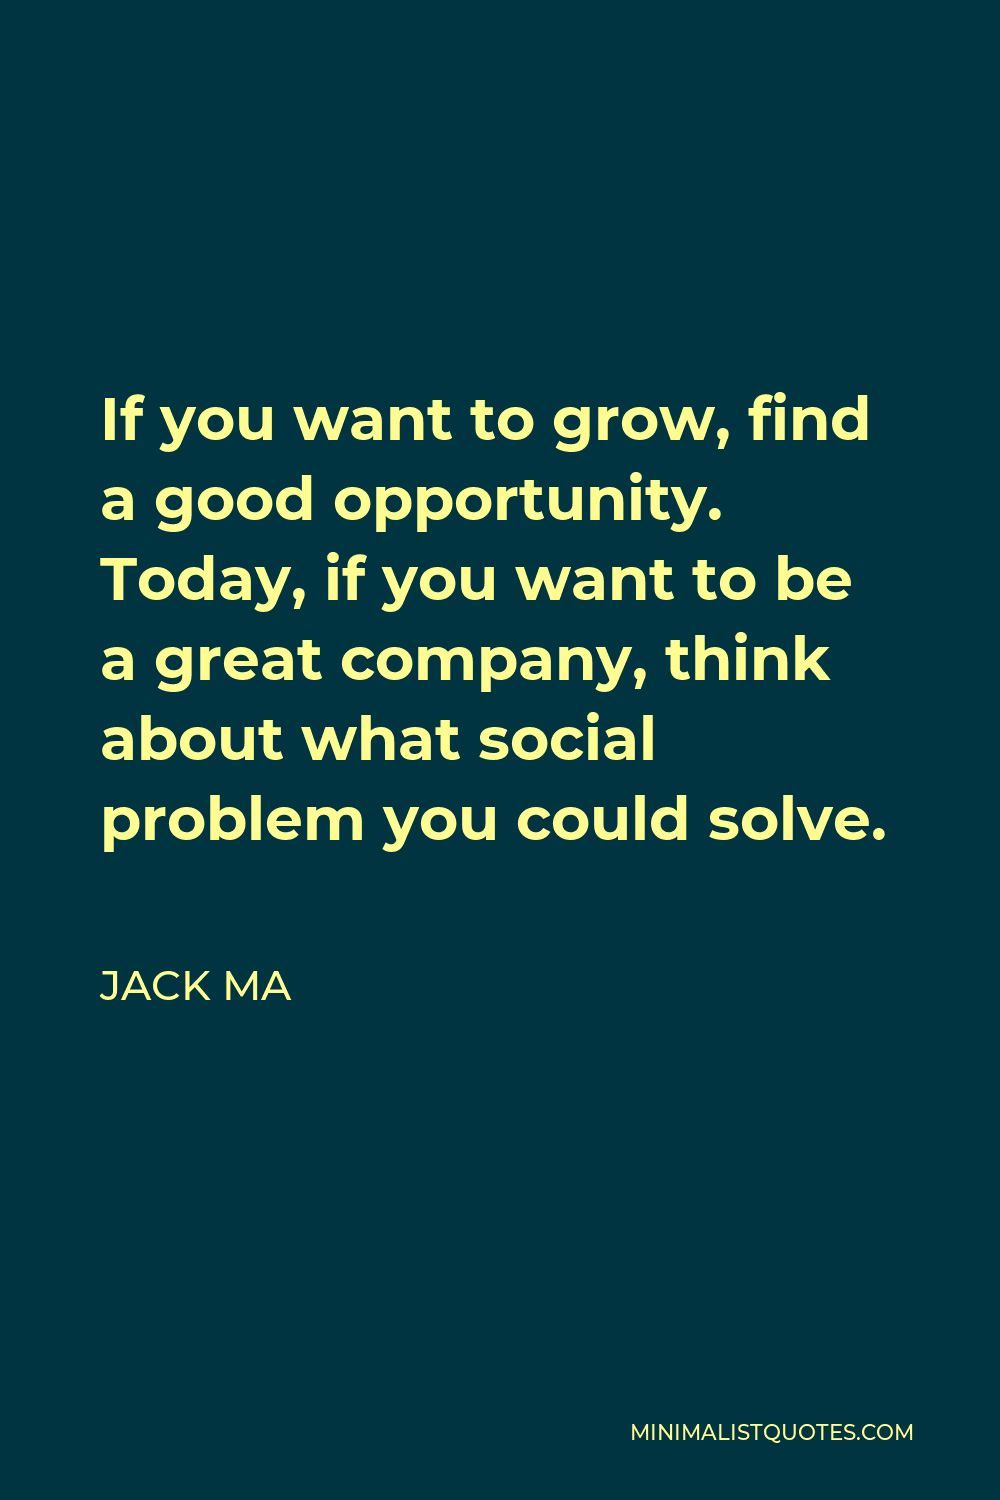 Jack Ma Quote - If you want to grow, find a good opportunity. Today, if you want to be a great company, think about what social problem you could solve.